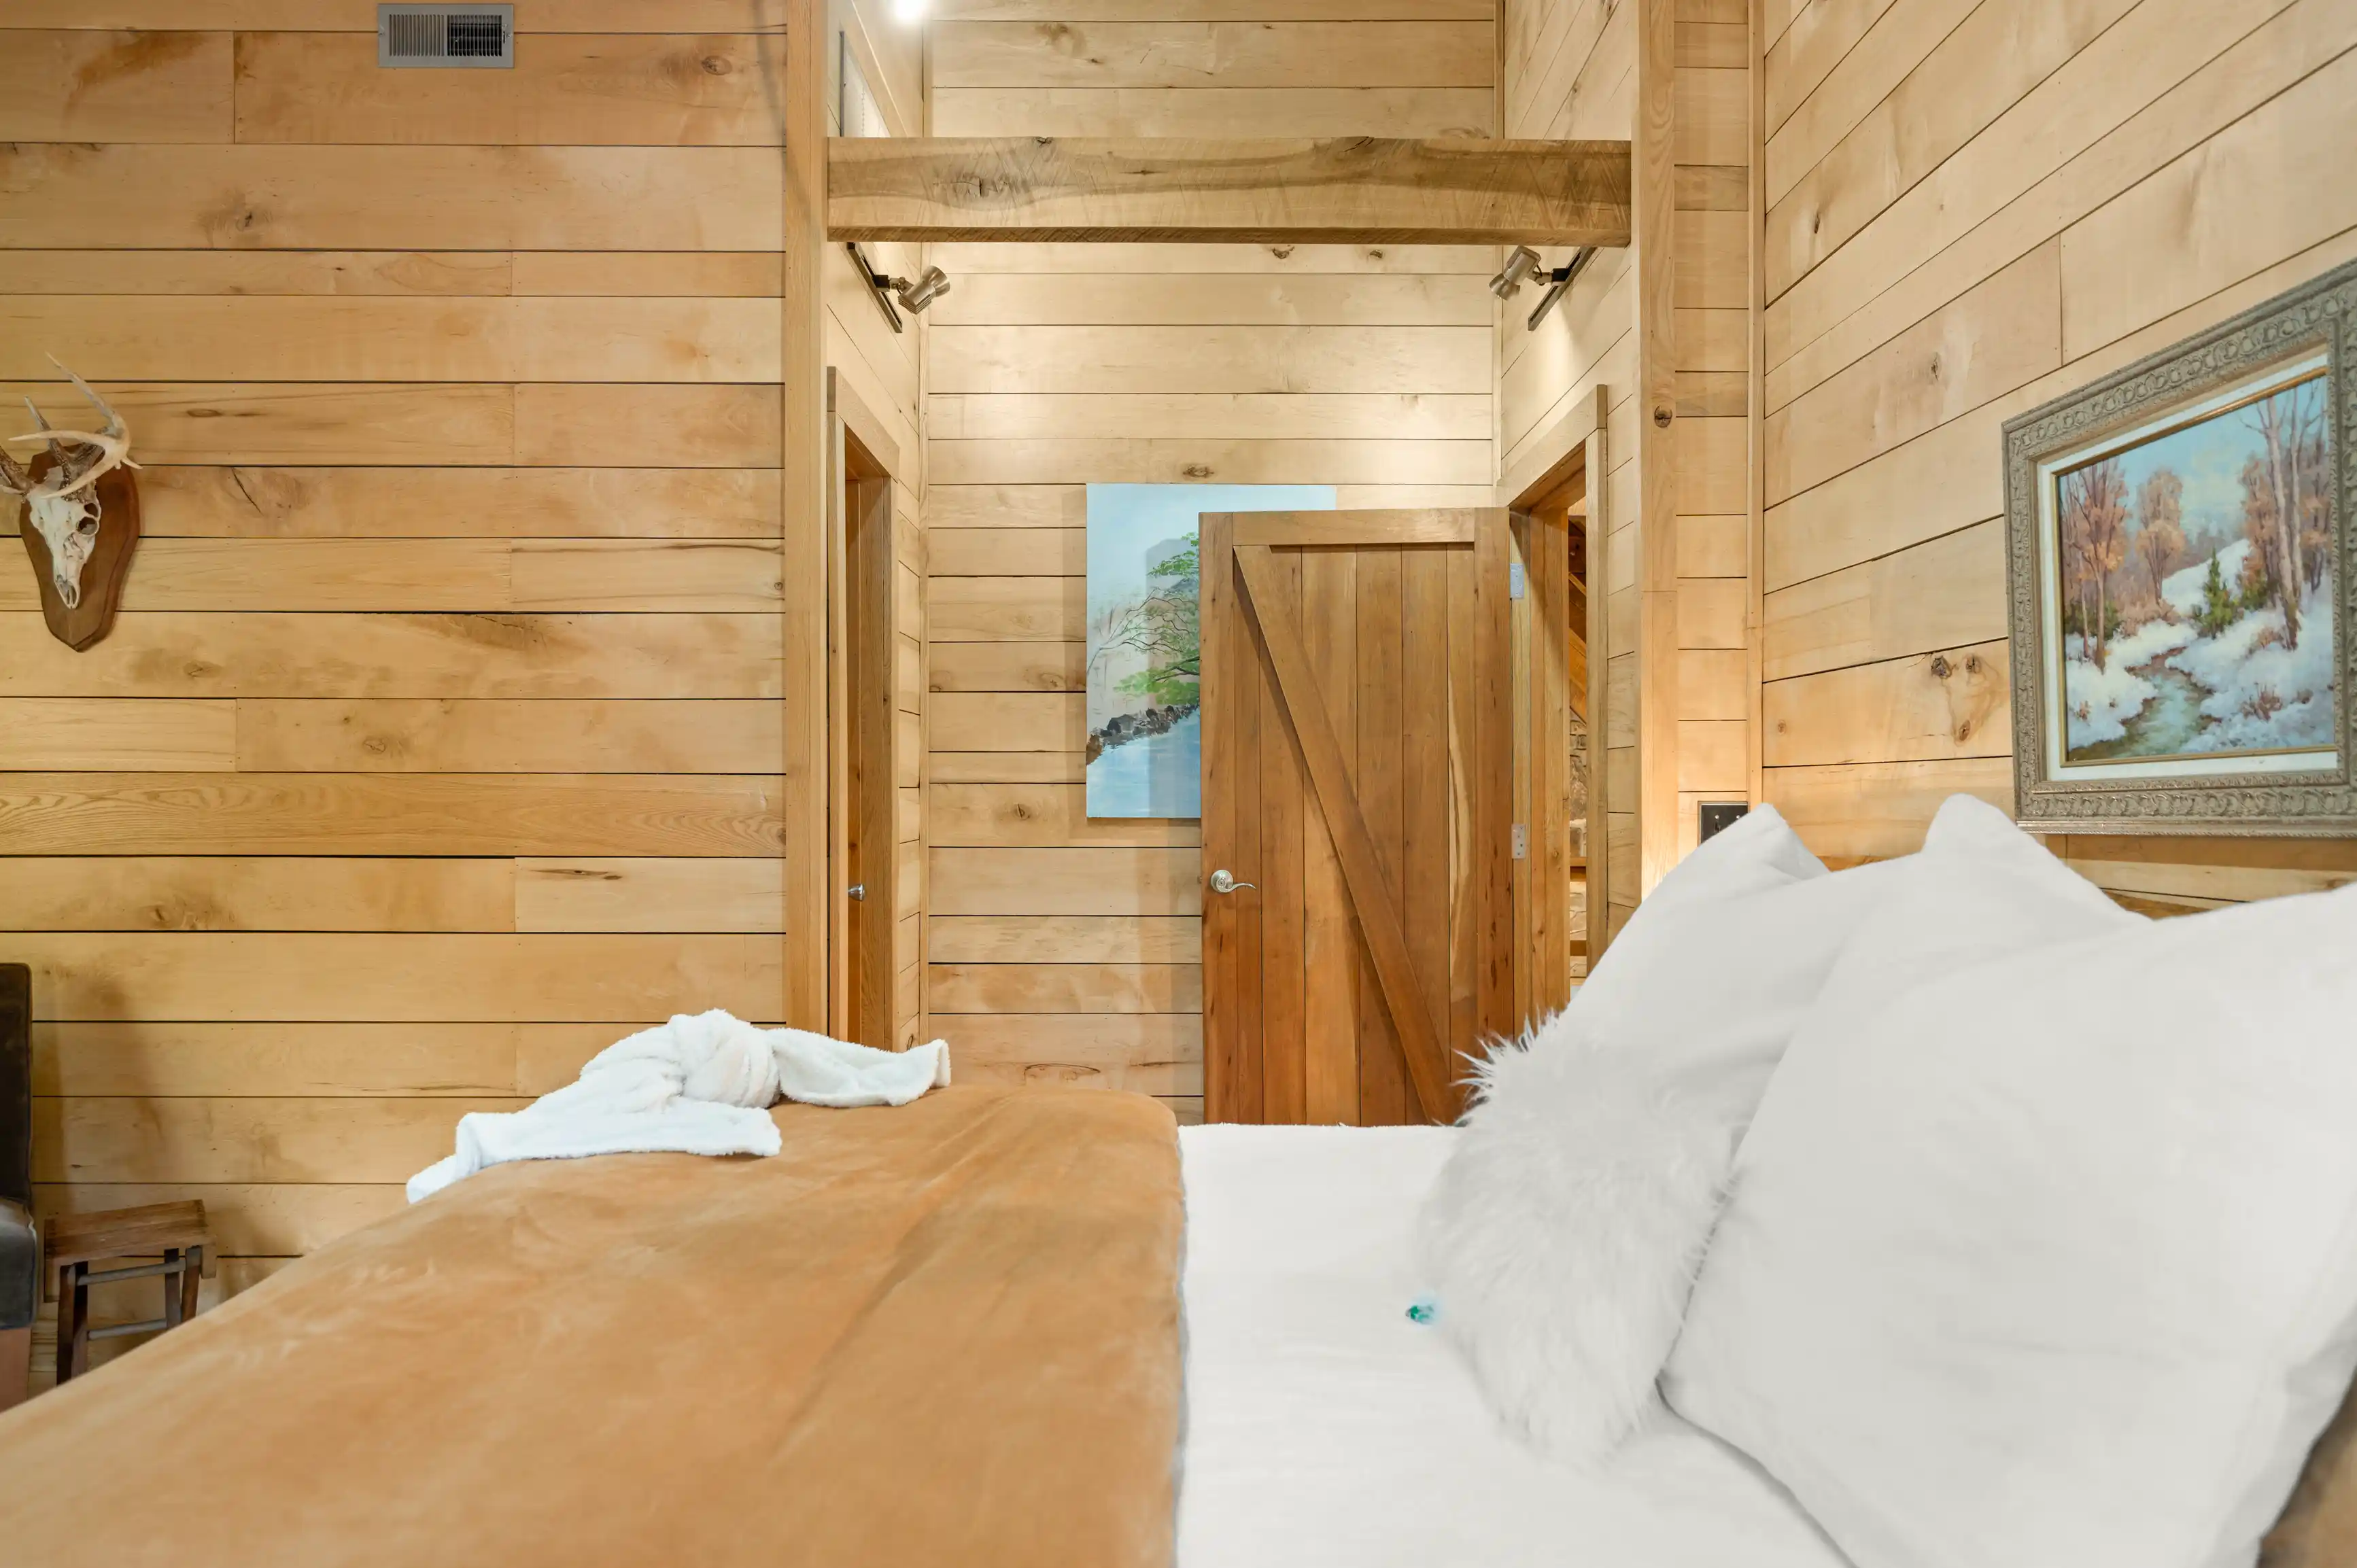 Cozy wooden cabin interior with a plush bed in the foreground, decorative framed artwork on the walls, and an open door leading to another room.